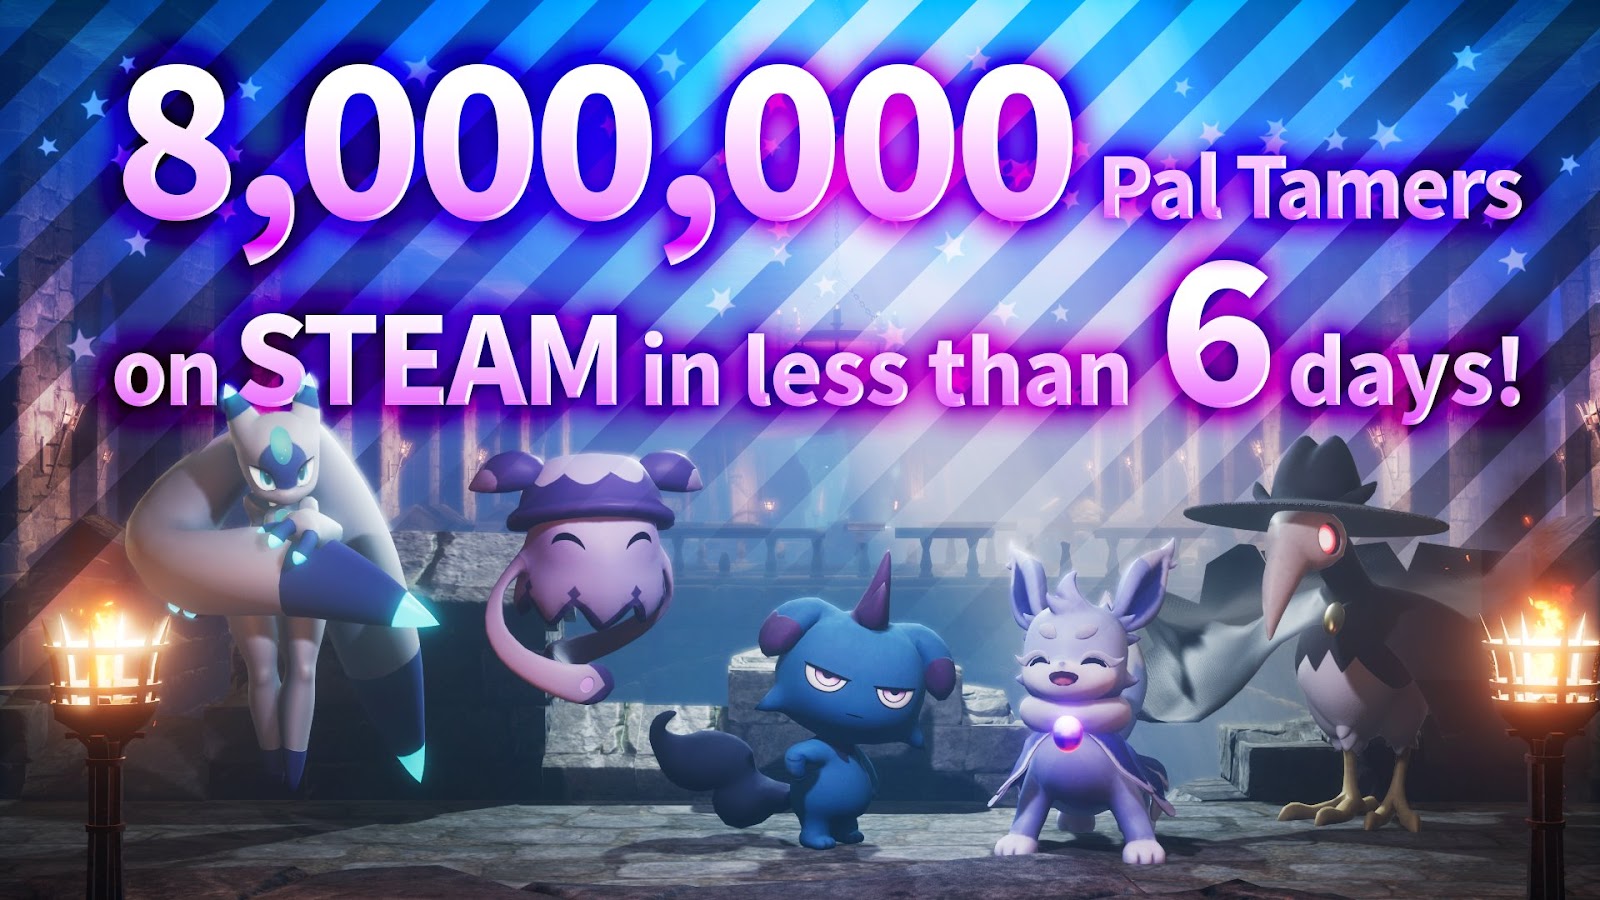 Palworld Coal - 8,000,000 Pal Tamers on Steam in less than 6 days!